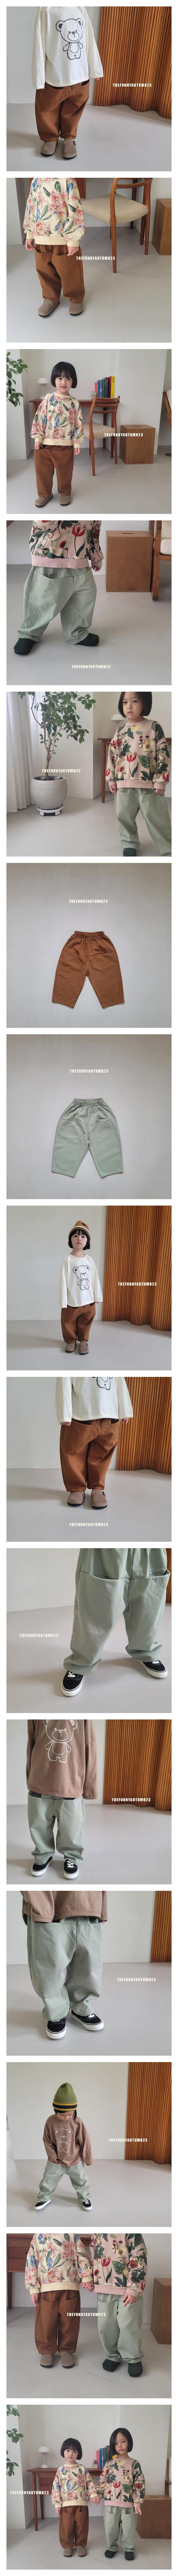 The Funny - Korean Children Fashion - #discoveringself - Daily Pants